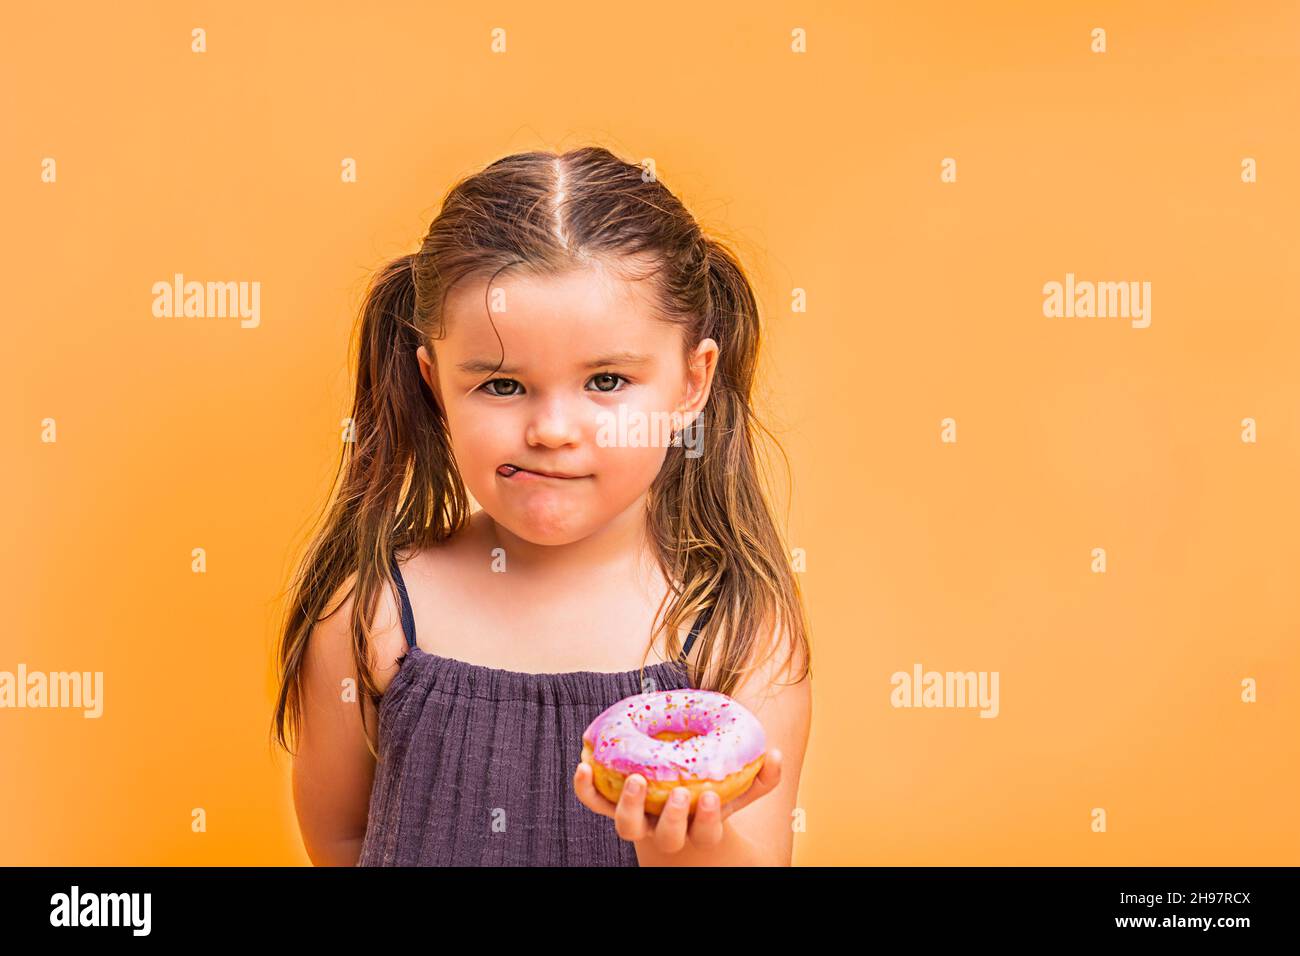 child girl holdind on the hand a pink donut.  on a yellow background Stock Photo